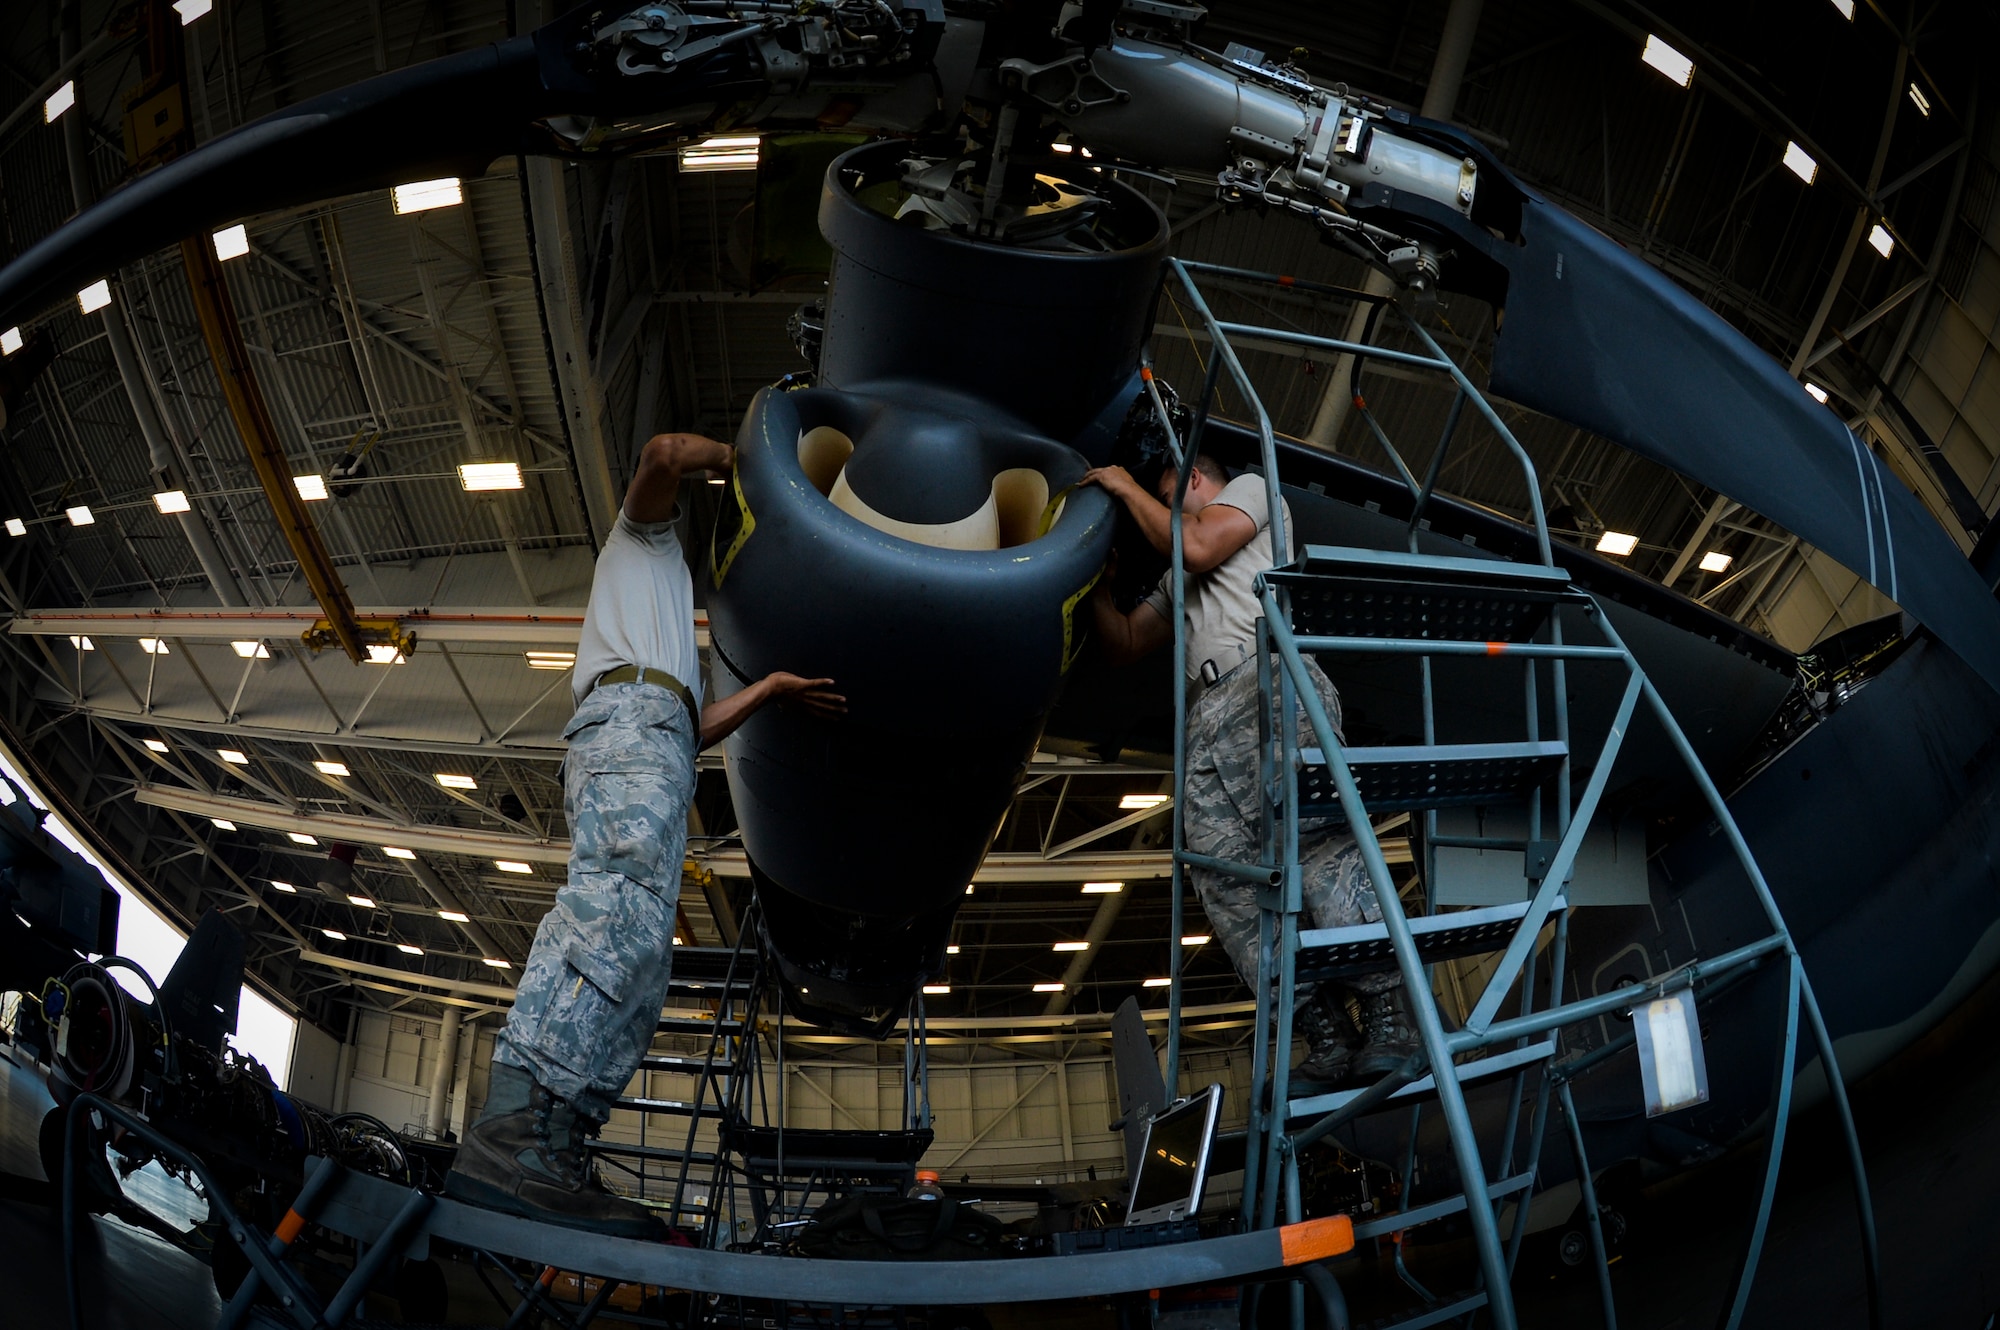 Senior Airman Richard Kodama, 8th Aircraft Maintenance Unit crew chief and Senior Airman Chad Pearsall, 8th AMU crew chief, work together to prepare a CV-22 Osprey engine for inspection on Hurlburt Field, Fla., Aug. 8, 2014. Crew chiefs ensure the Ospreys are mission ready for 8th Special Operations Squadron personnel. (U.S. Air Force photo/Senior Airman Christopher Callaway) 